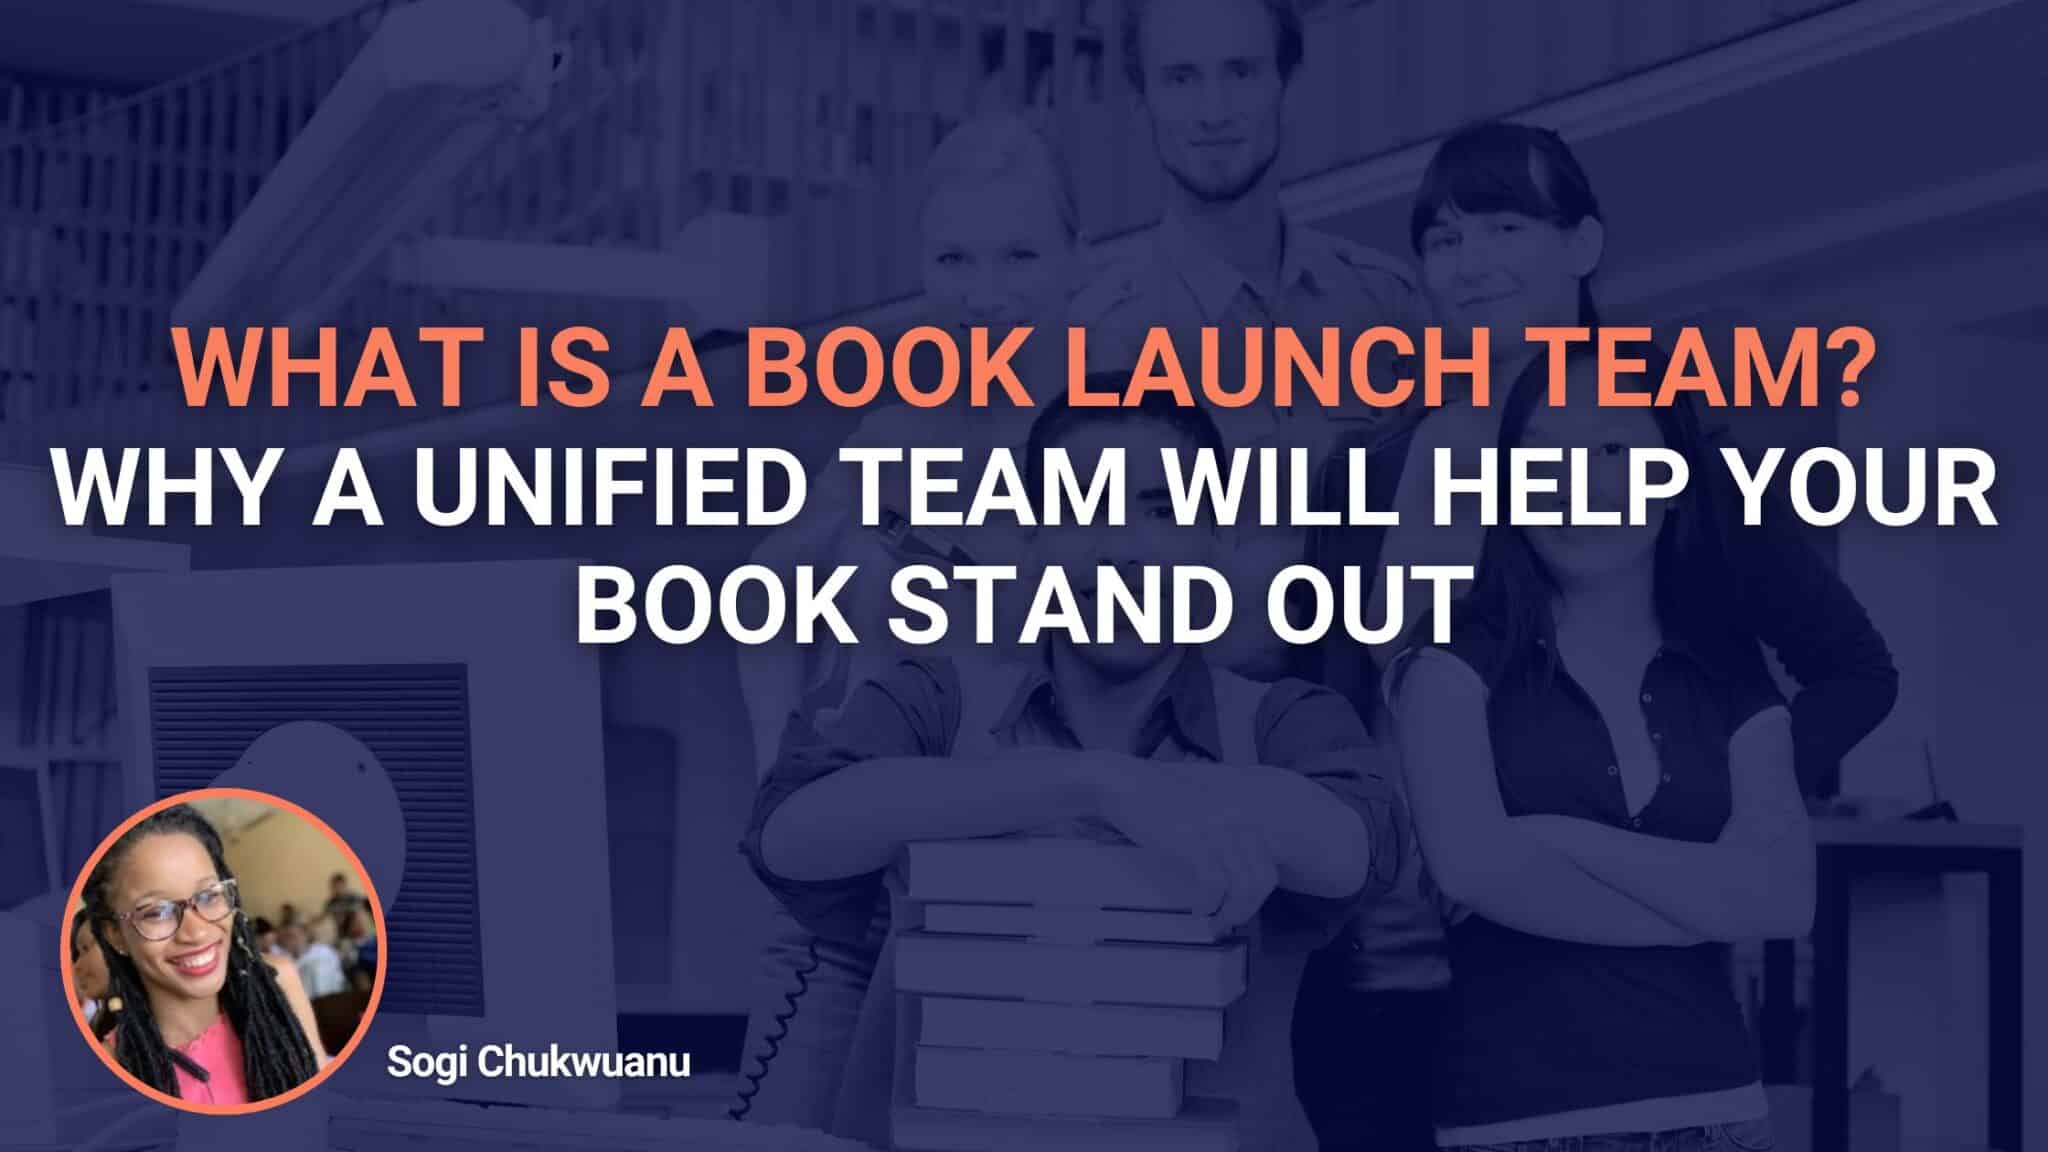 What Is A Book Launch Team? Why A Unified Team Will Help Your Book Stand Out